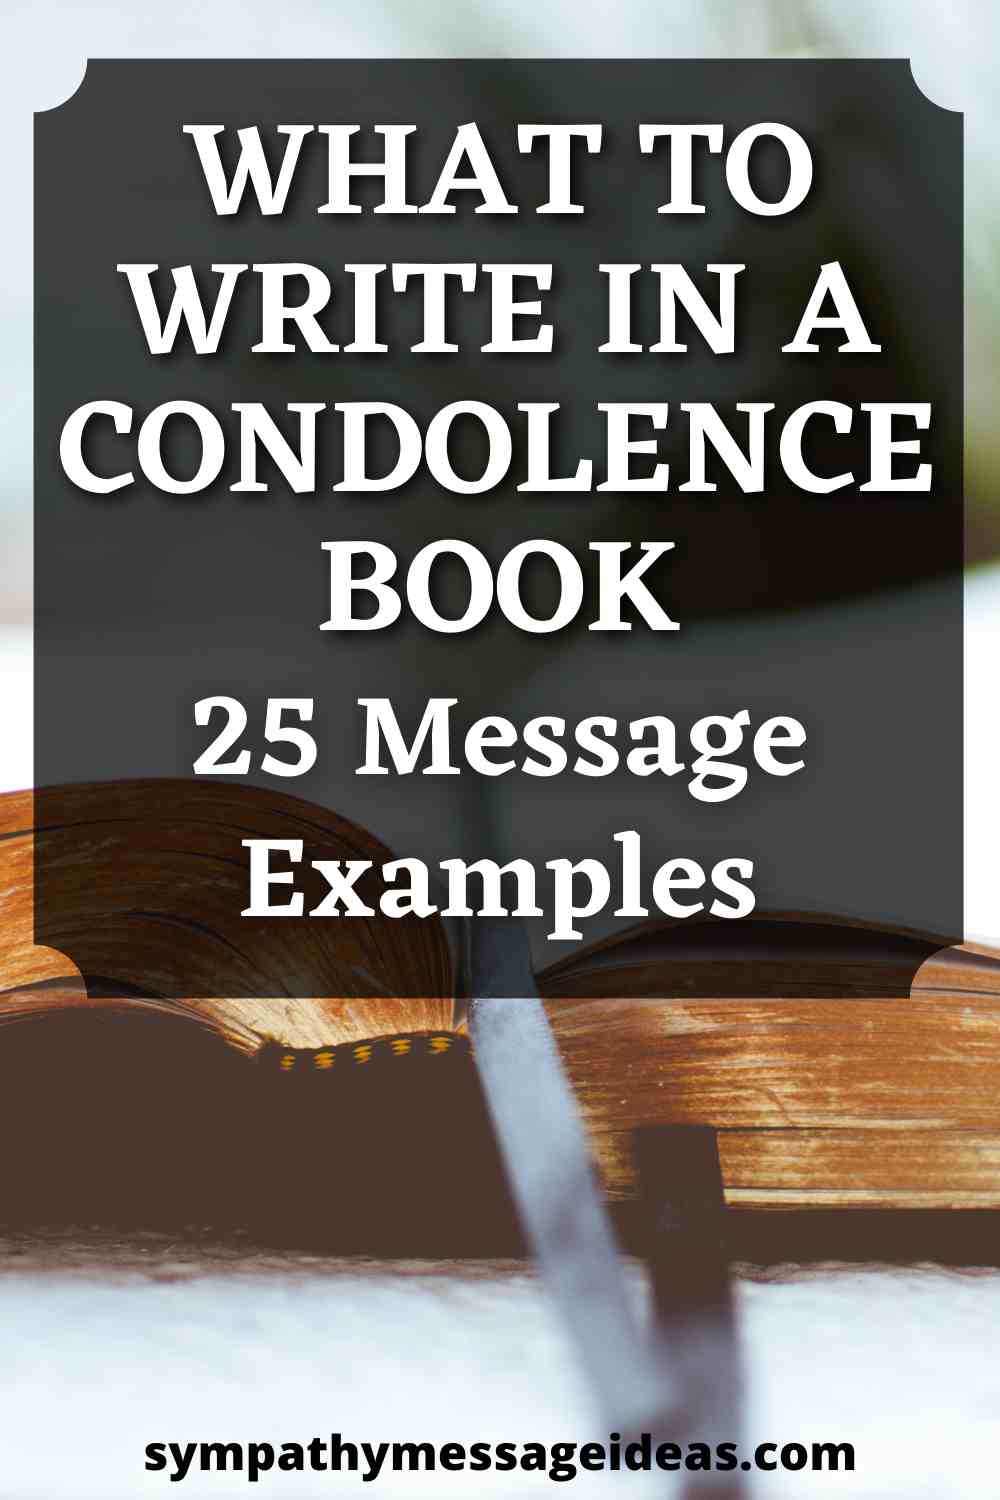 What to write in a condolence book